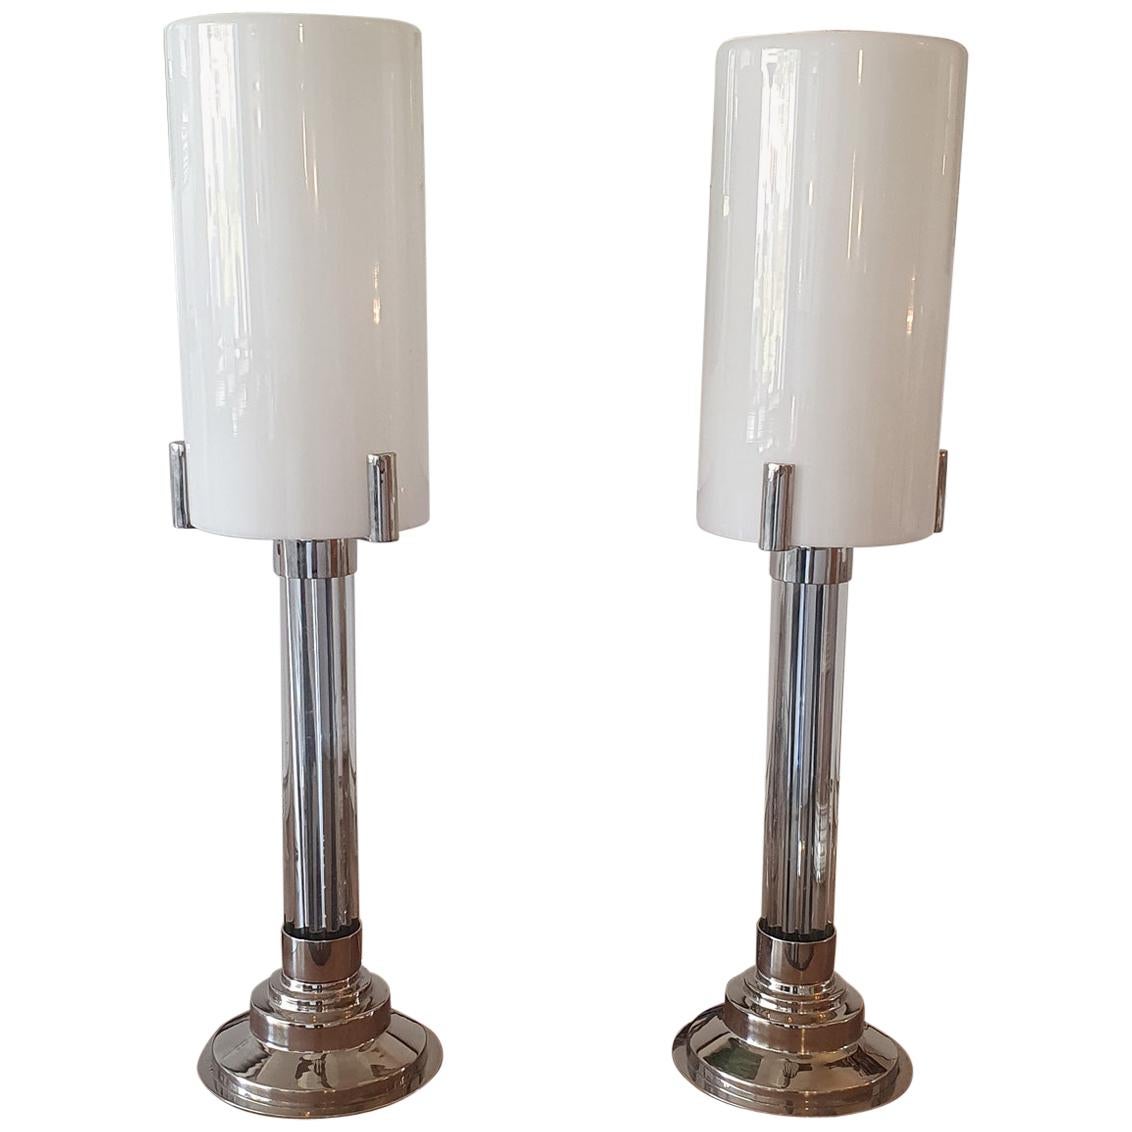 Pair of Art Deco lamp with nickel finish and vintage glass. For Sale